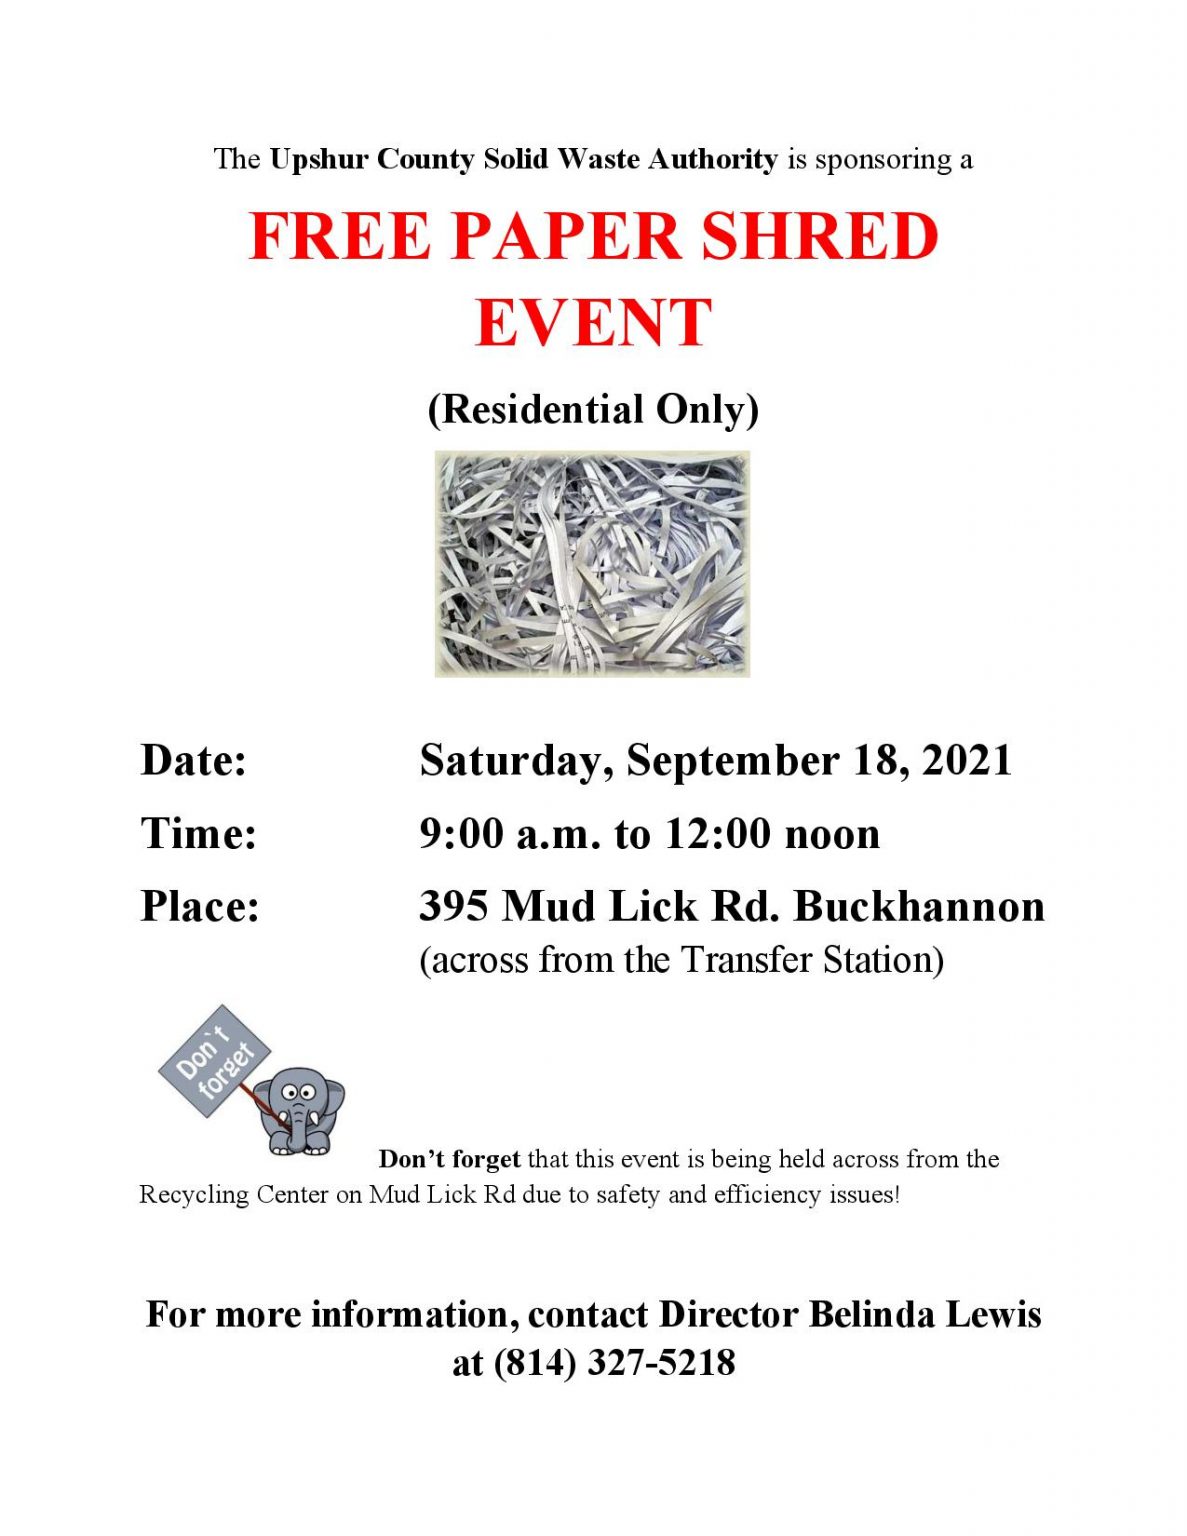 CITY OF BUCKHANNON » Free Paper Shred Event Announced!